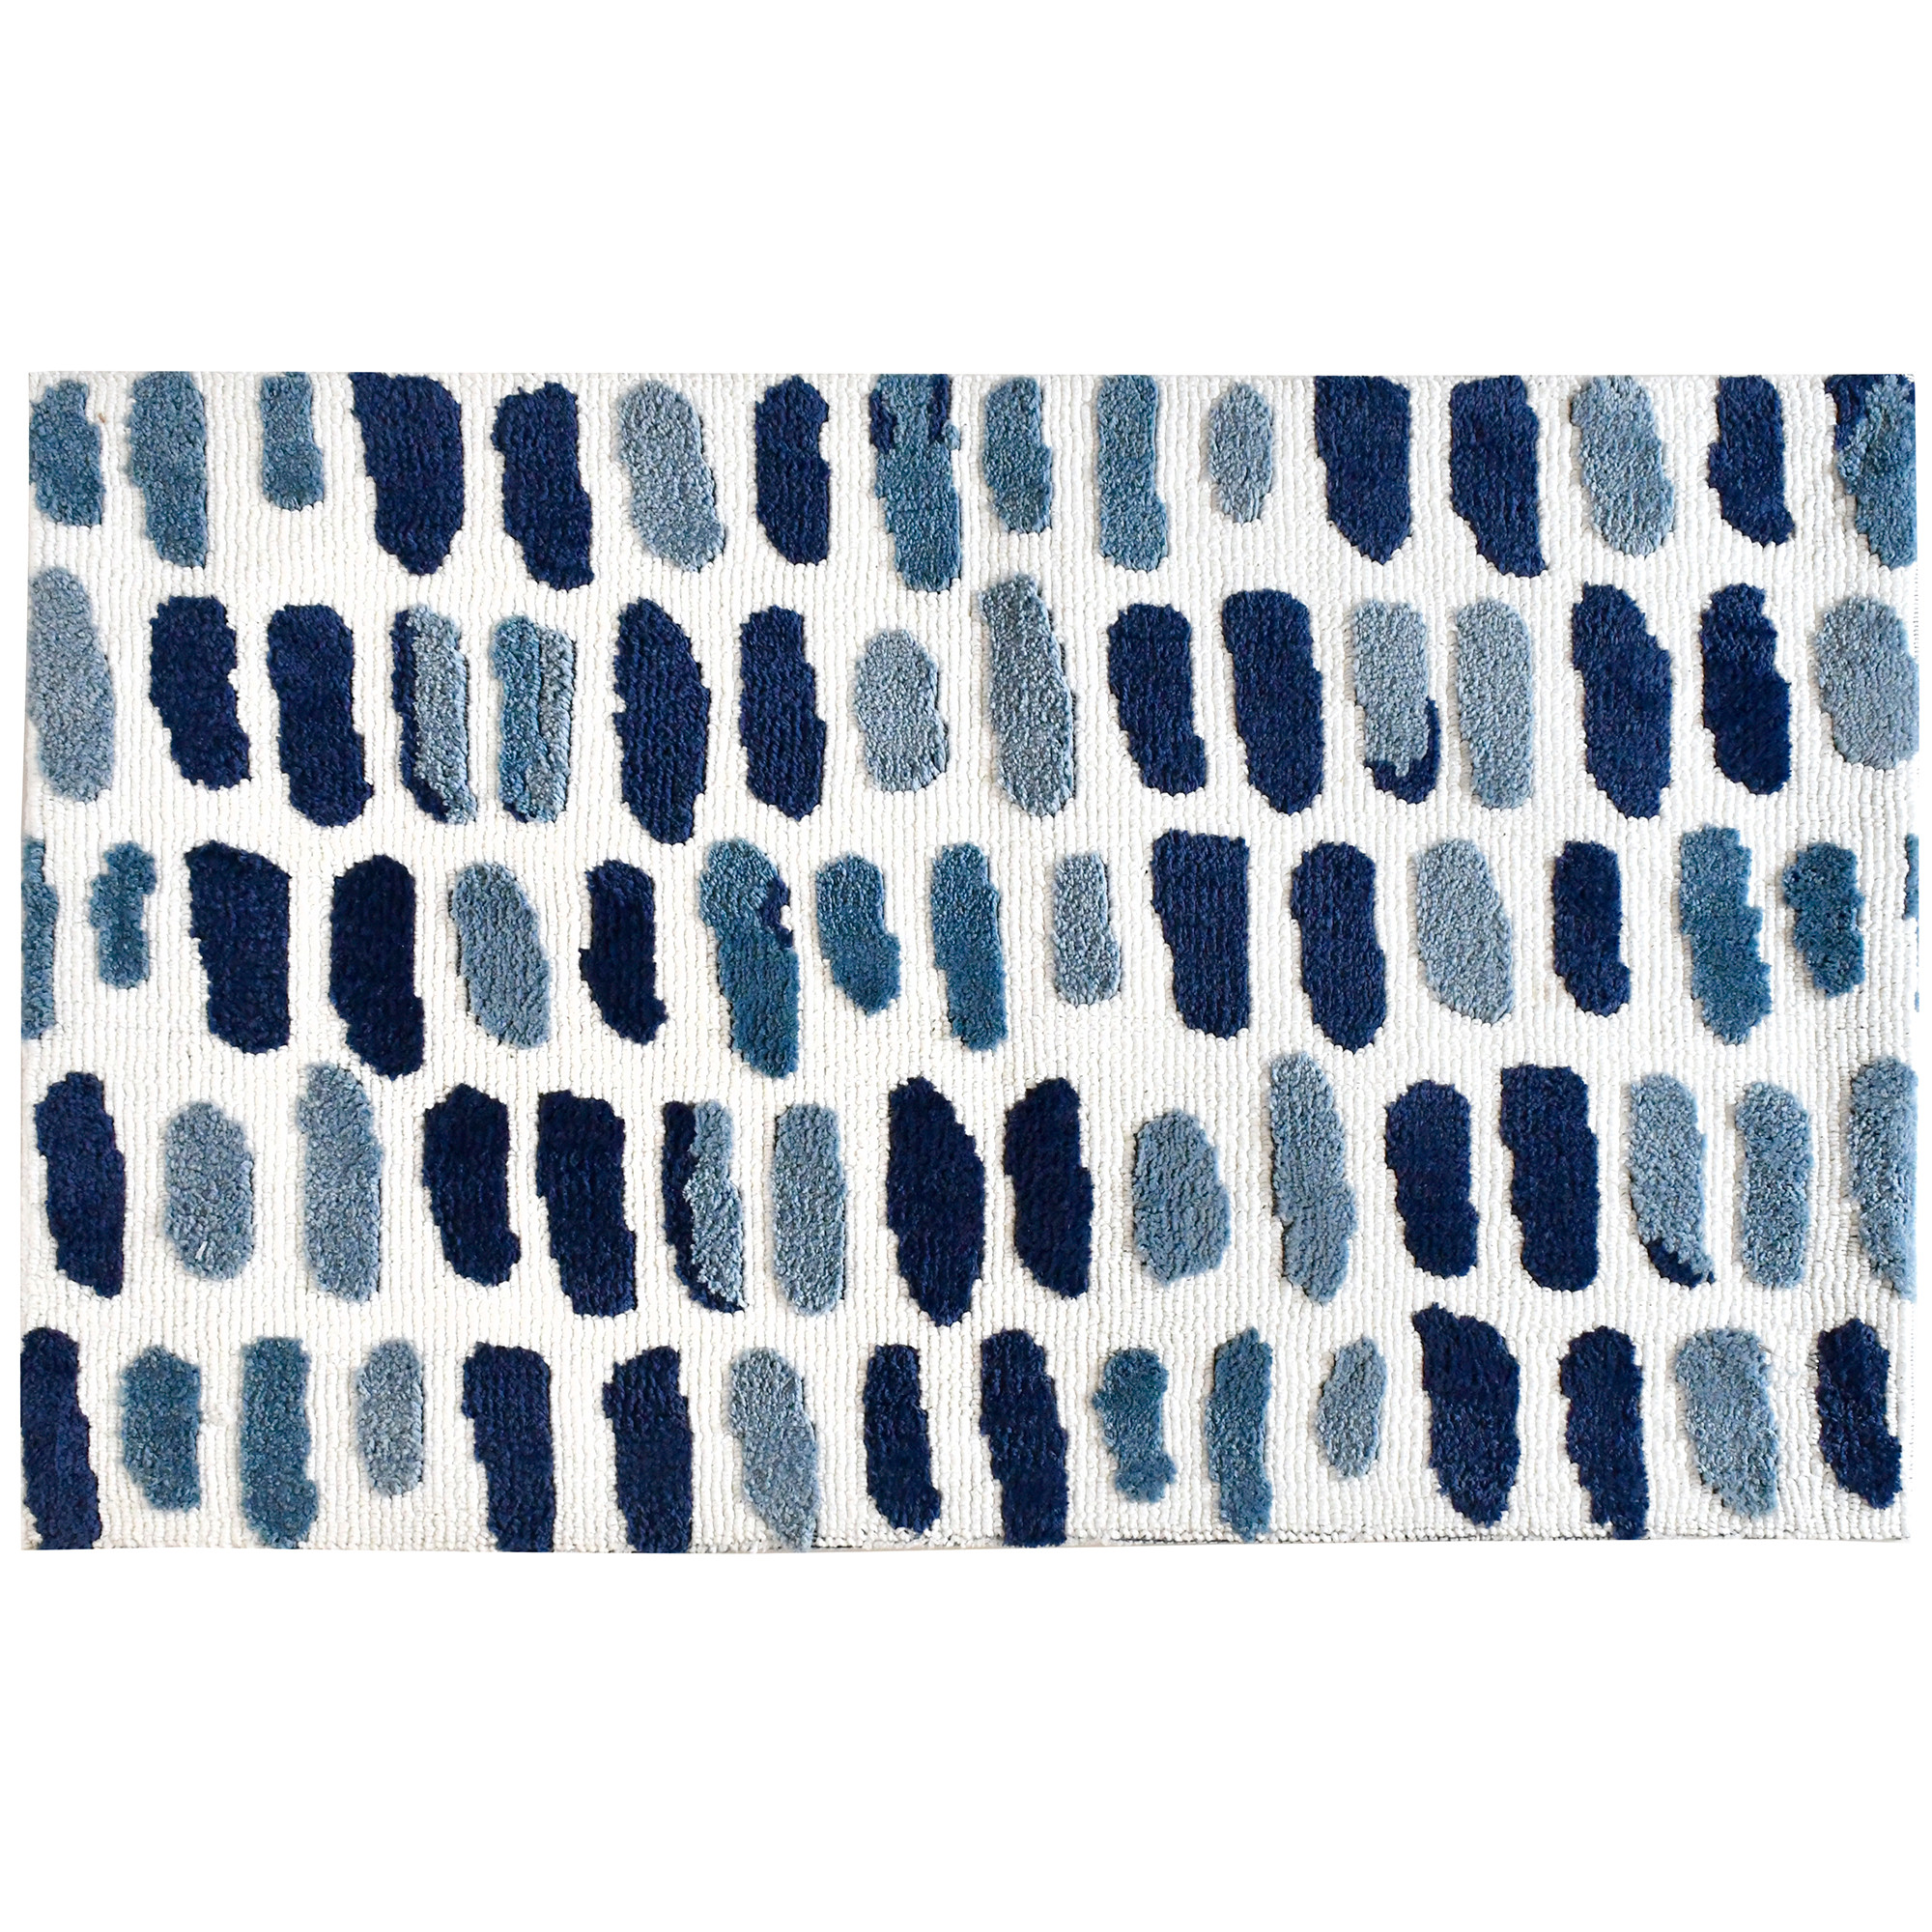 Hues of the Mediterranean are captured in their beauty and harnessed on this Simple Spaces by Jellybean® accent rug. The cool colors and easy pattern of this rug will warm up the area of your choice.